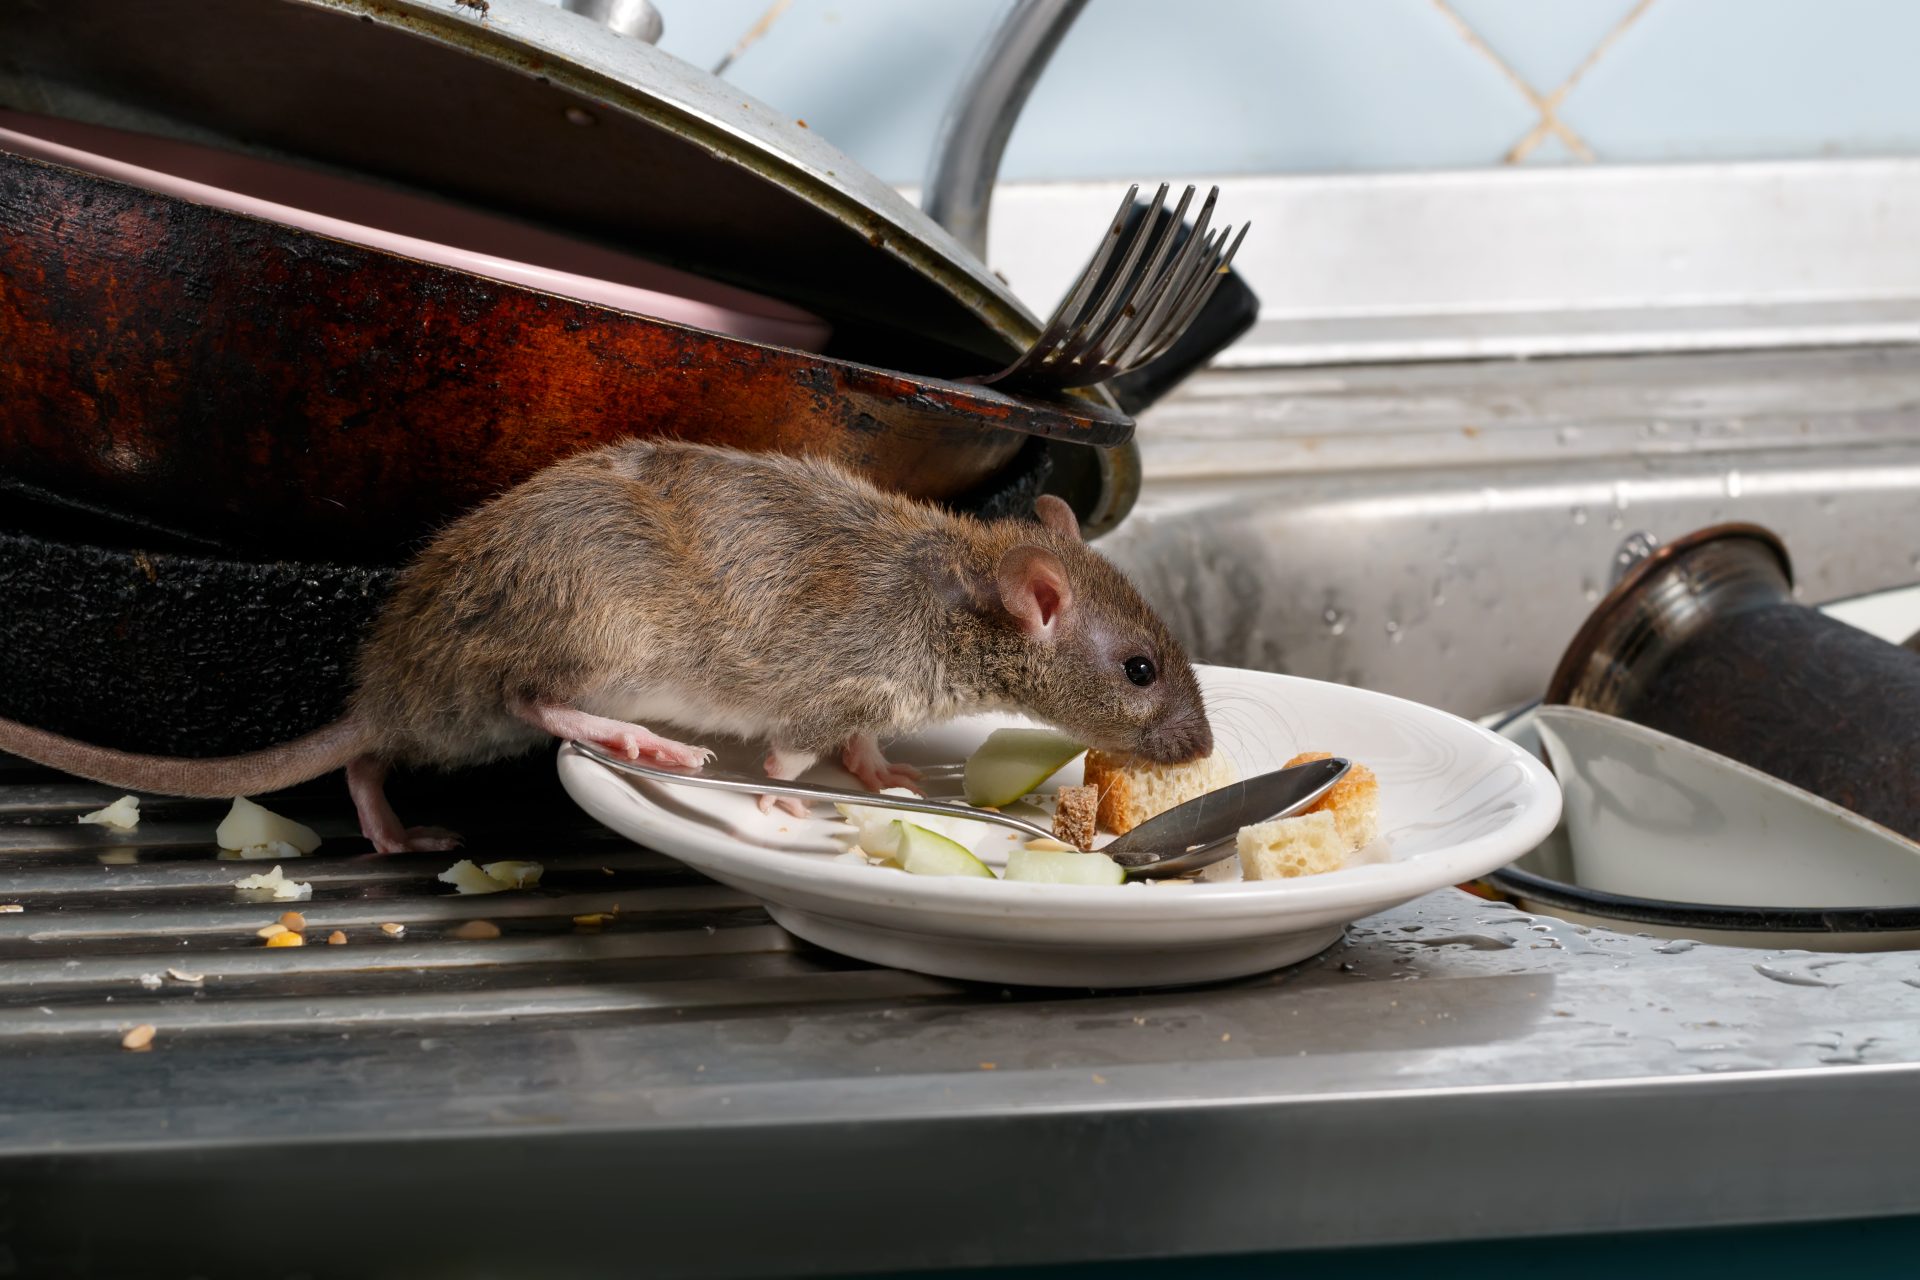 https://pestline.com.au/wp-content/uploads/2023/02/how-to-get-rid-of-mice-or-rats.jpg